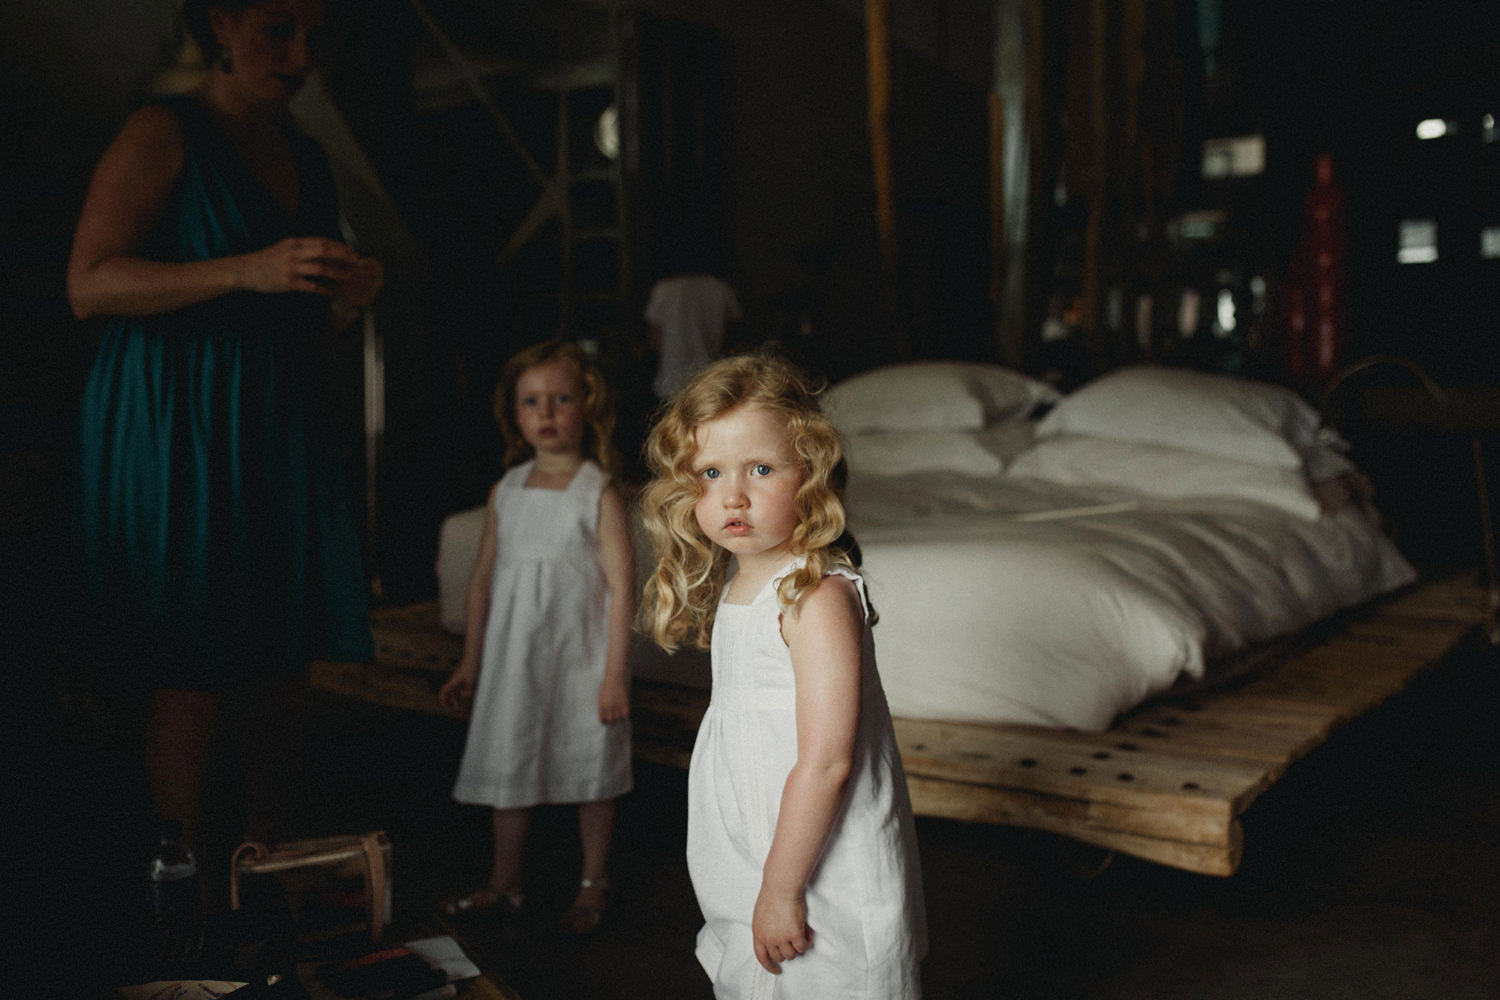 Angelic little flower girl from a wedding preparations at Areias do Seixo, Portugal